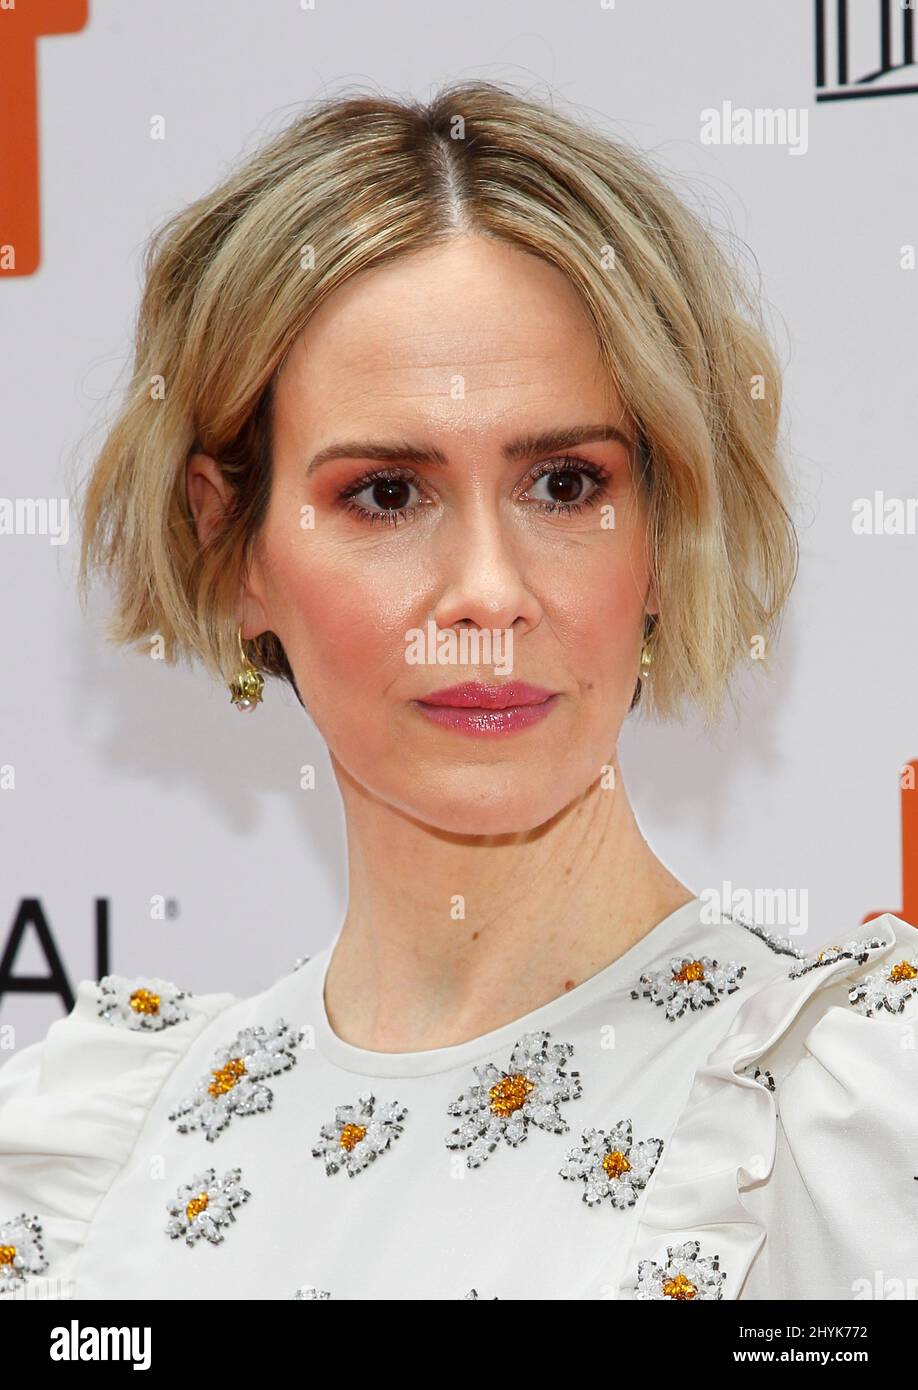 Sarah Paulson at the premiere of 'Abominable' during the 2019 Toronto International Film Festival Stock Photo